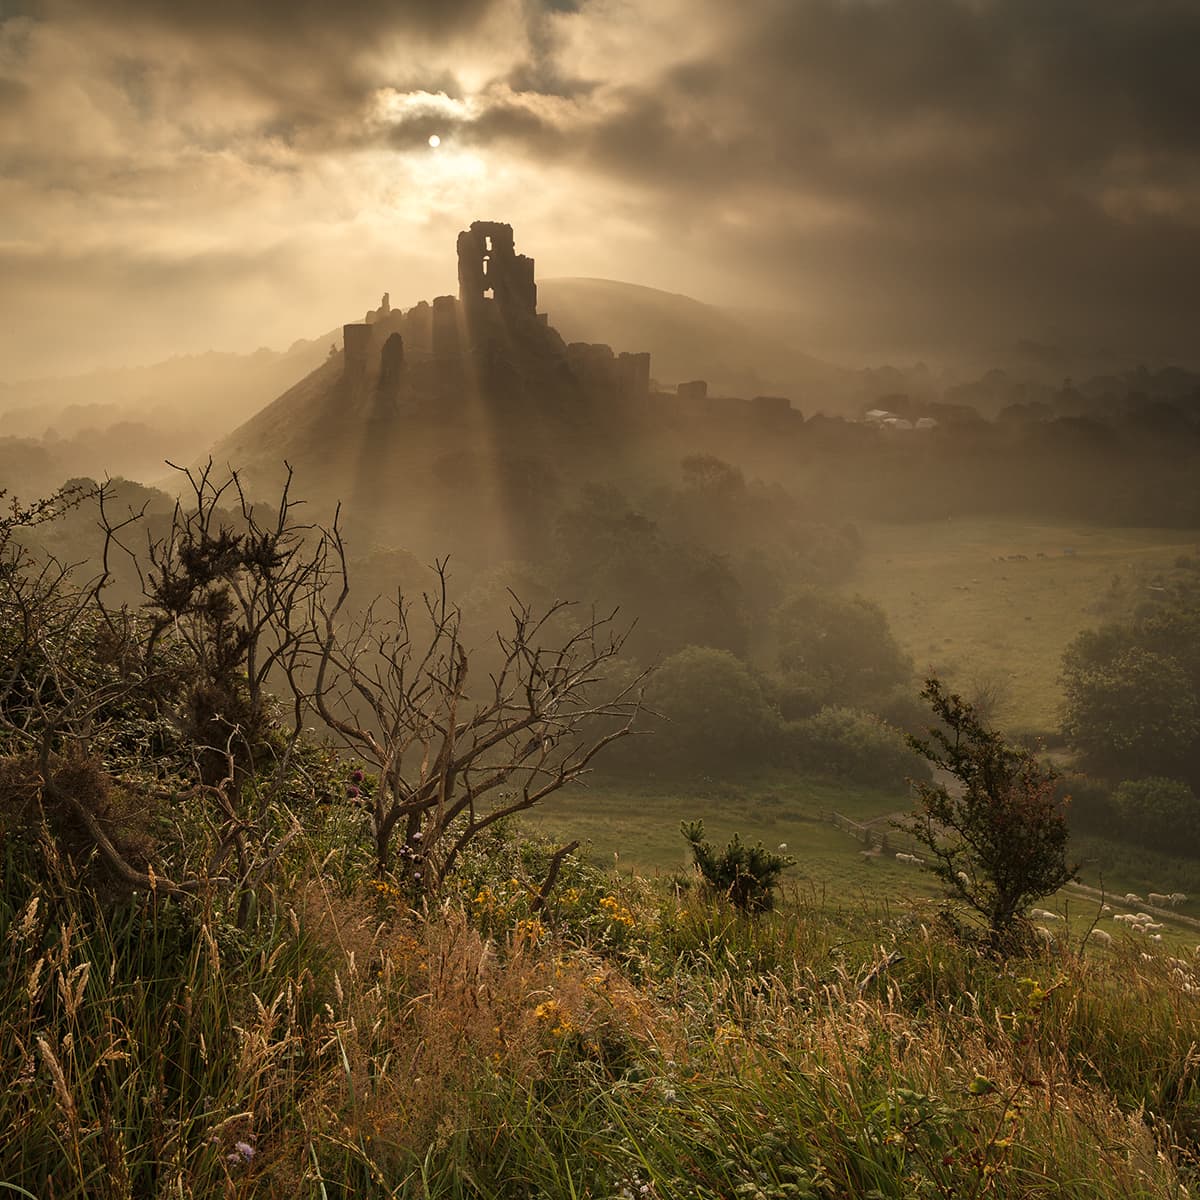 Corfe Castle Summer Mist by Andy Farrer Canon EOS 5D Mark II, 21mm, 1/40sec at f/11, ISO 100